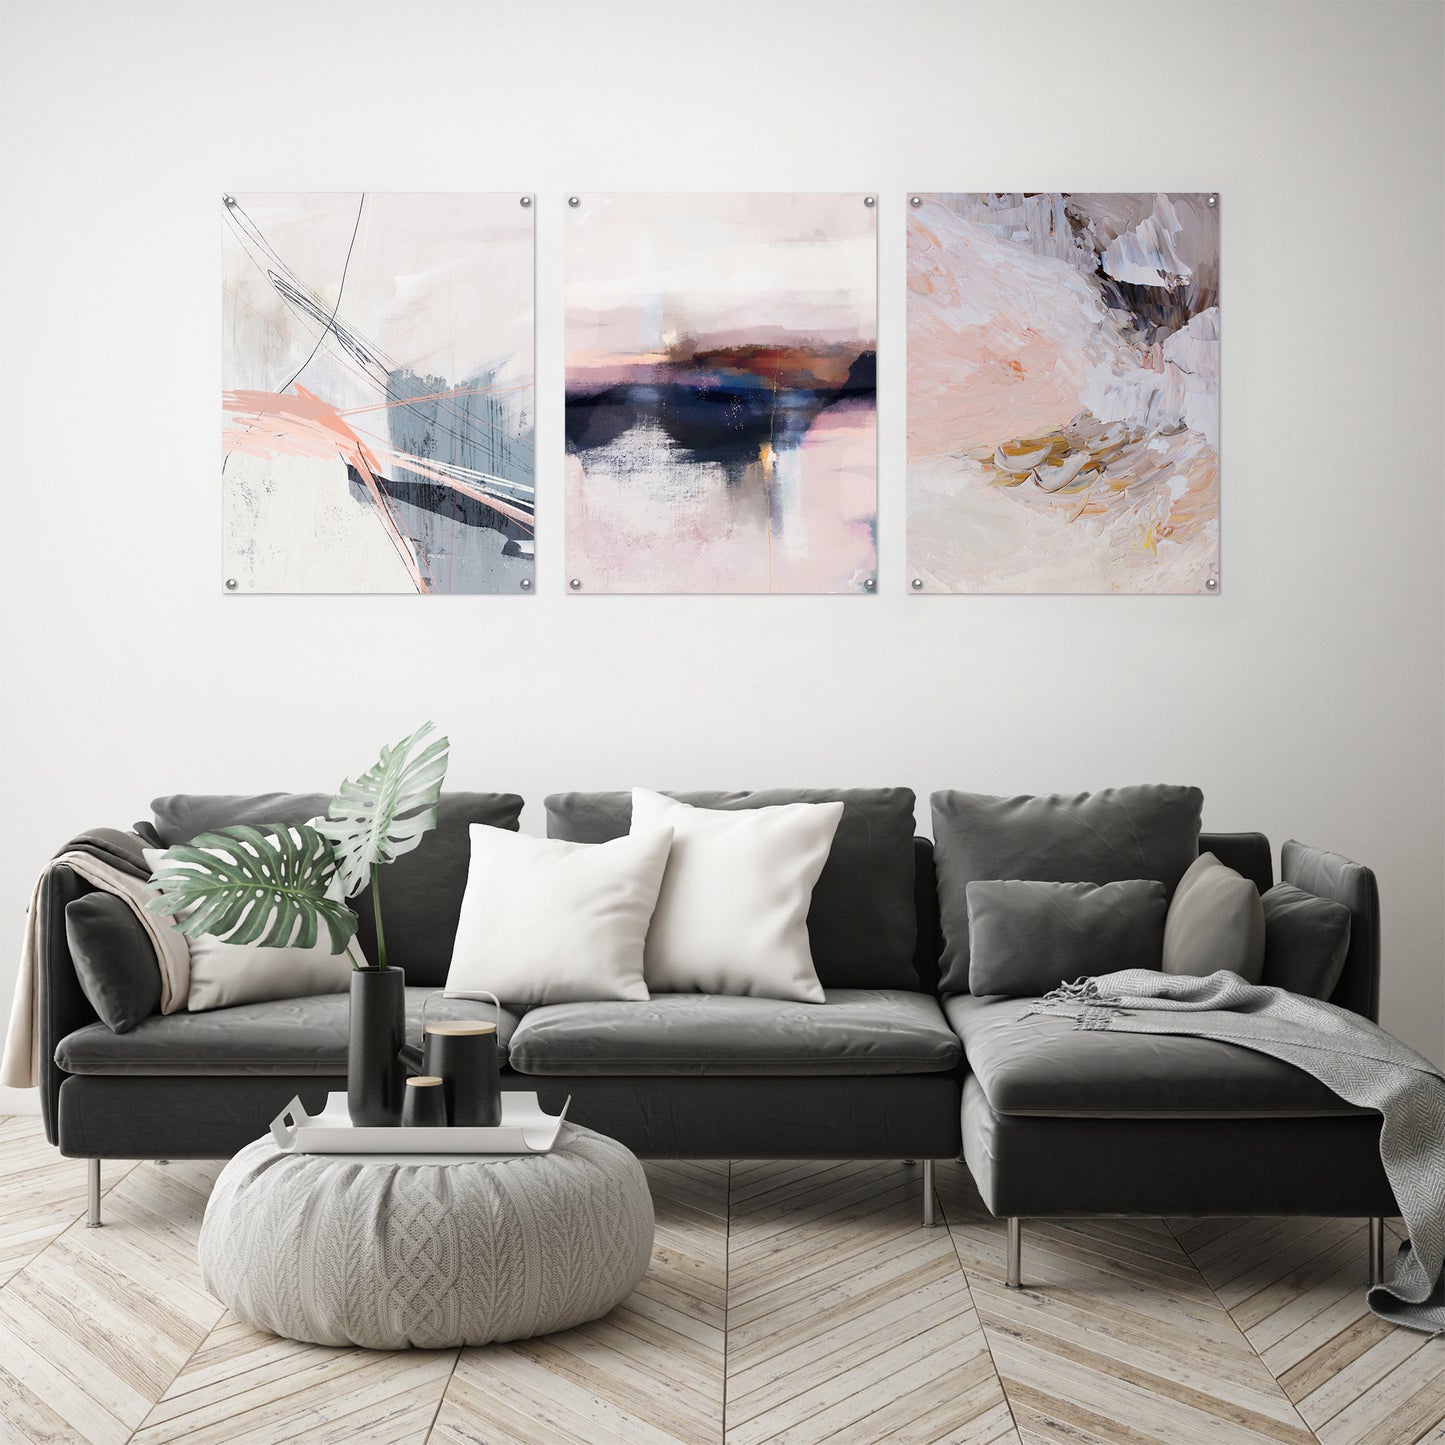 (Set of 3) Triptych Wall Art Smoky Blush by Louise Robinson - Poster Print